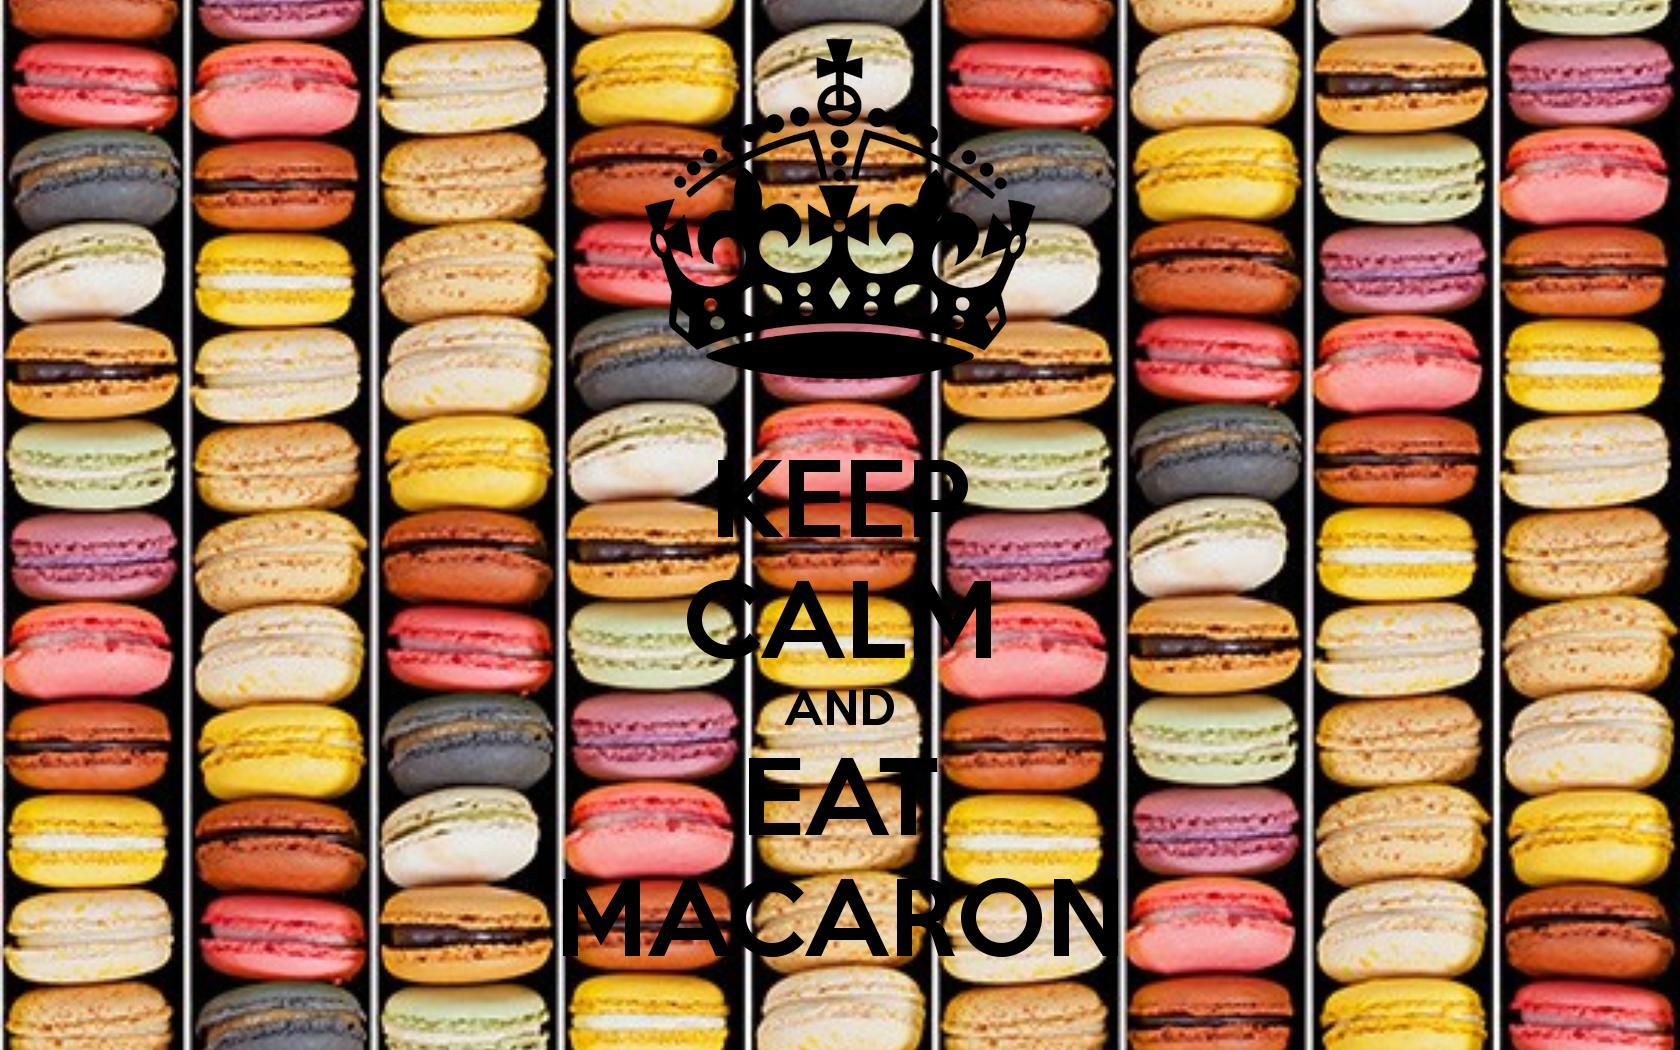 KEEP CALM AND EAT MACARON CALM AND CARRY ON Image Generator